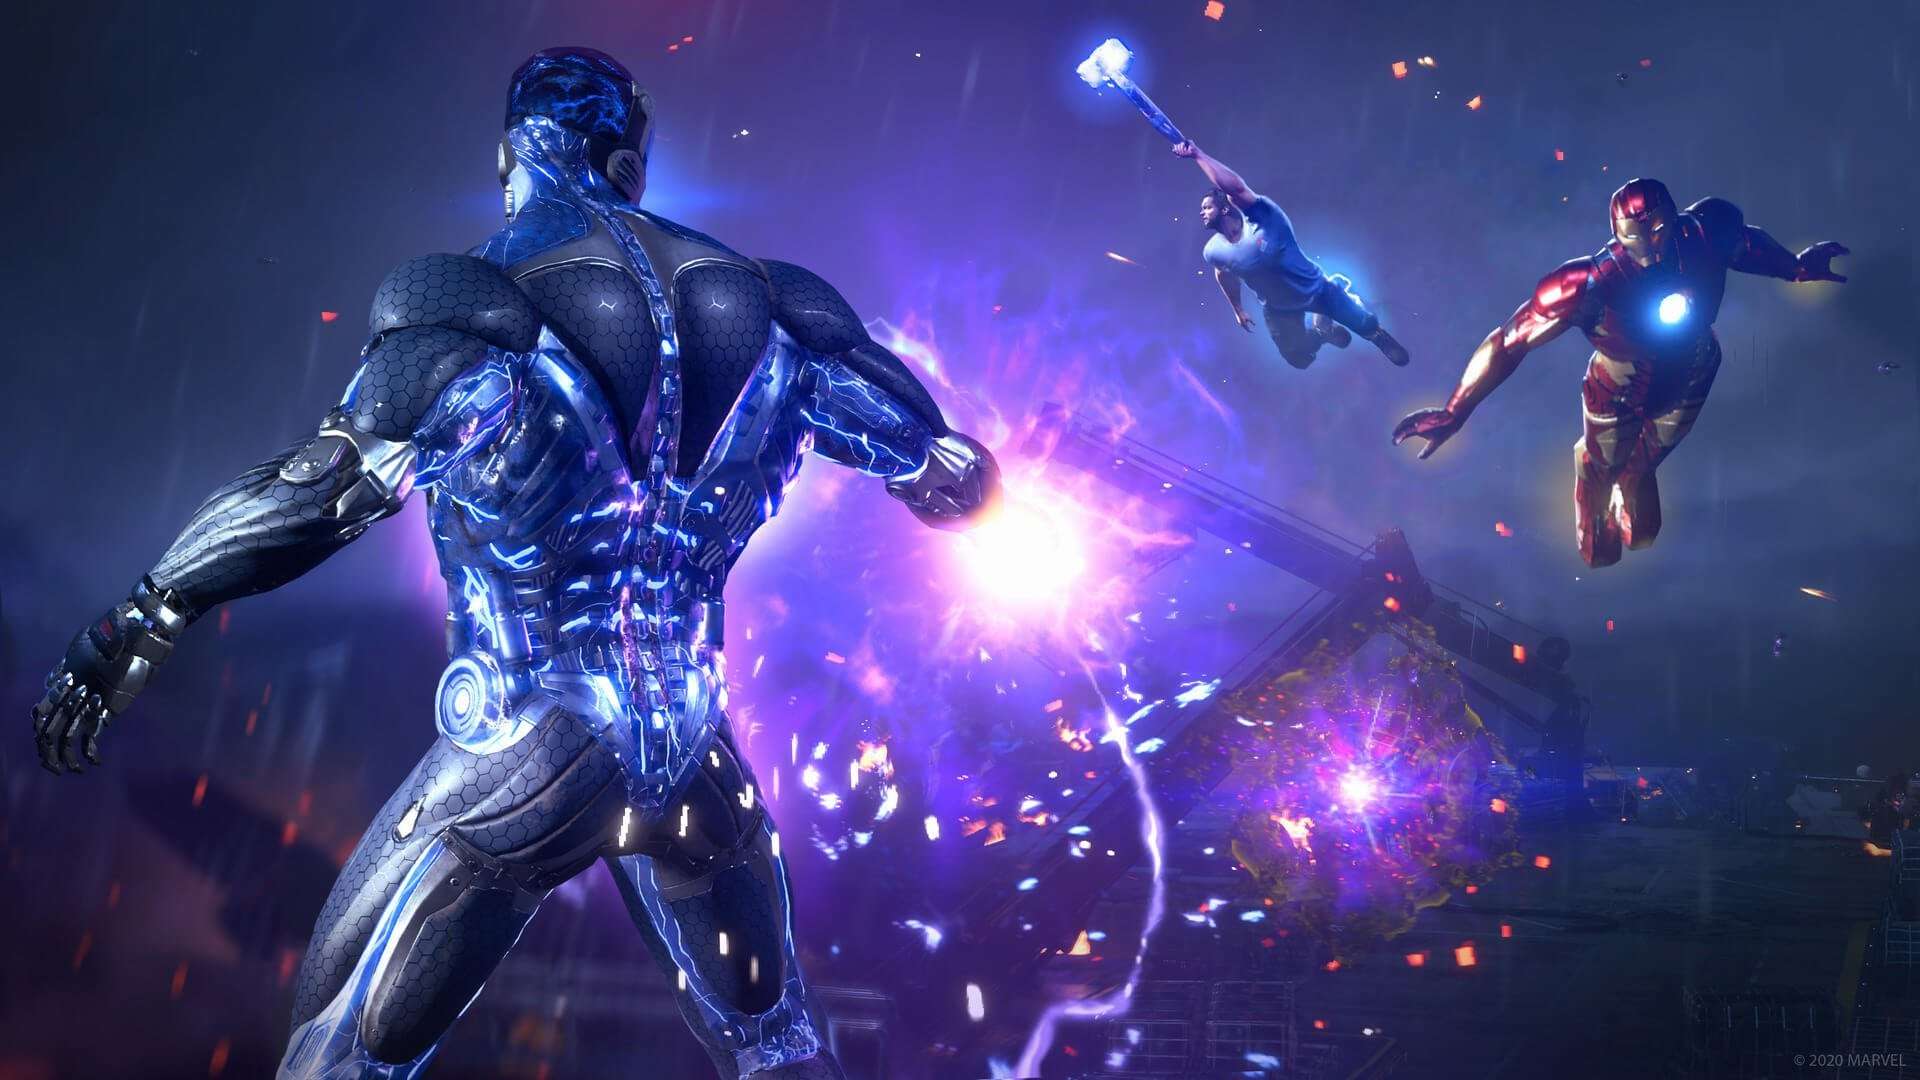 image for Marvel’s Avengers Beta cannot run on NVIDIA RTX2080Ti with 4K/60fps even on Low Settings